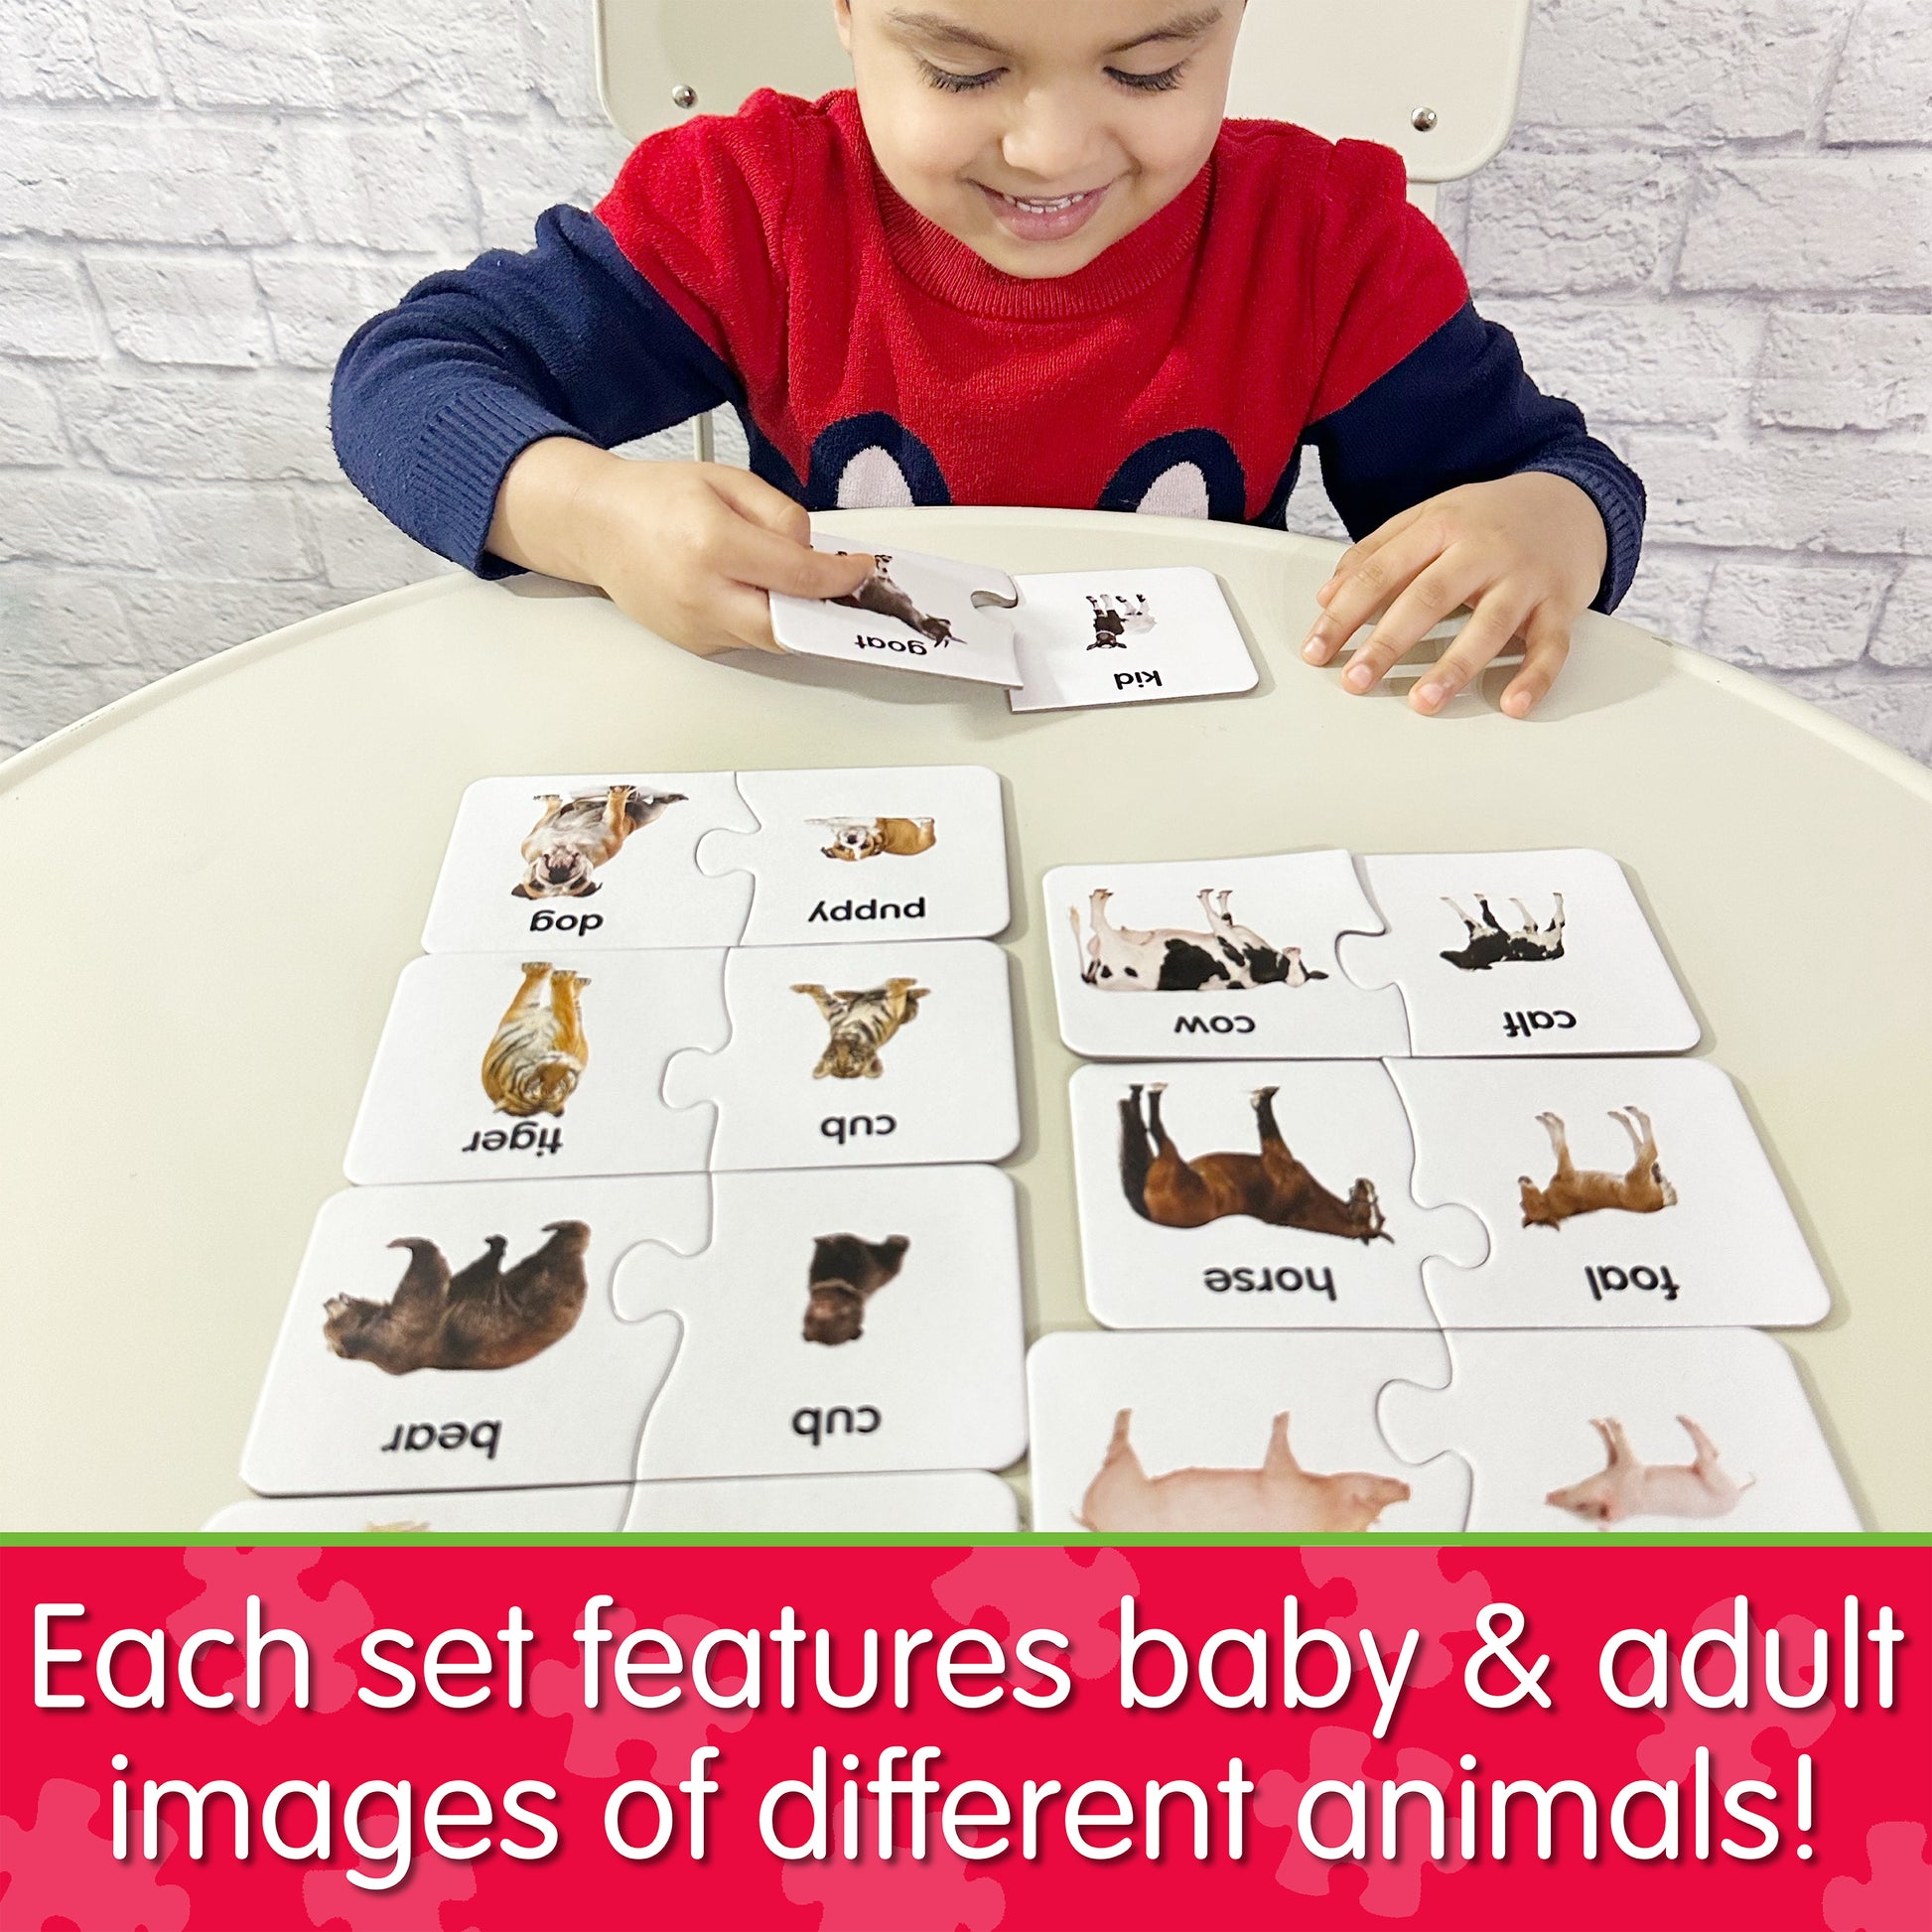 Infographic of young boy playing Match It - Animal Families that says, "Each set features baby and adult images of different animals!"